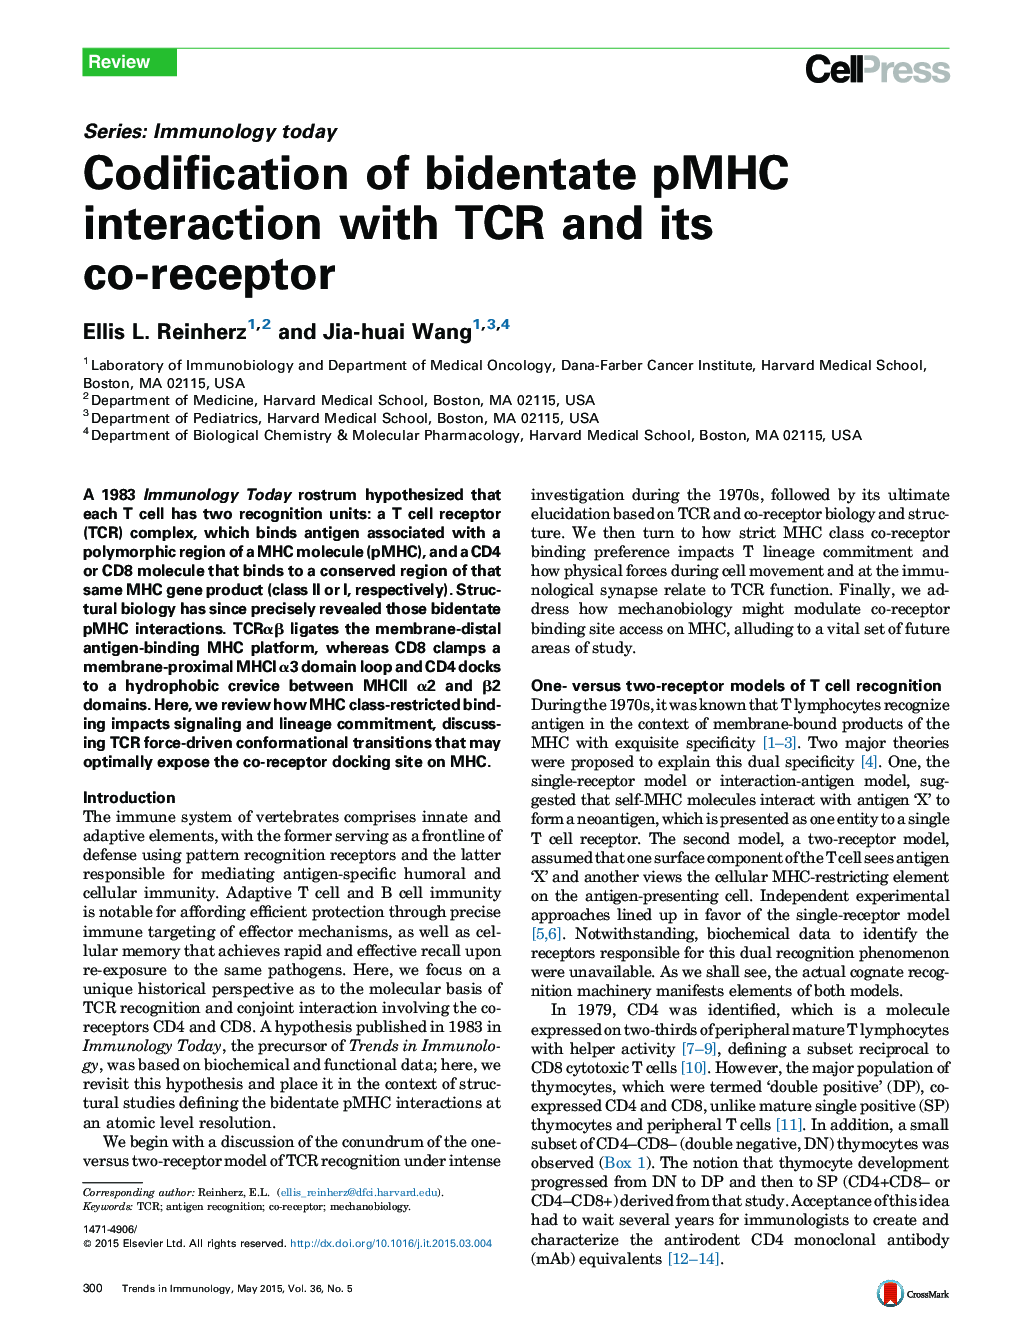 Codification of bidentate pMHC interaction with TCR and its co-receptor